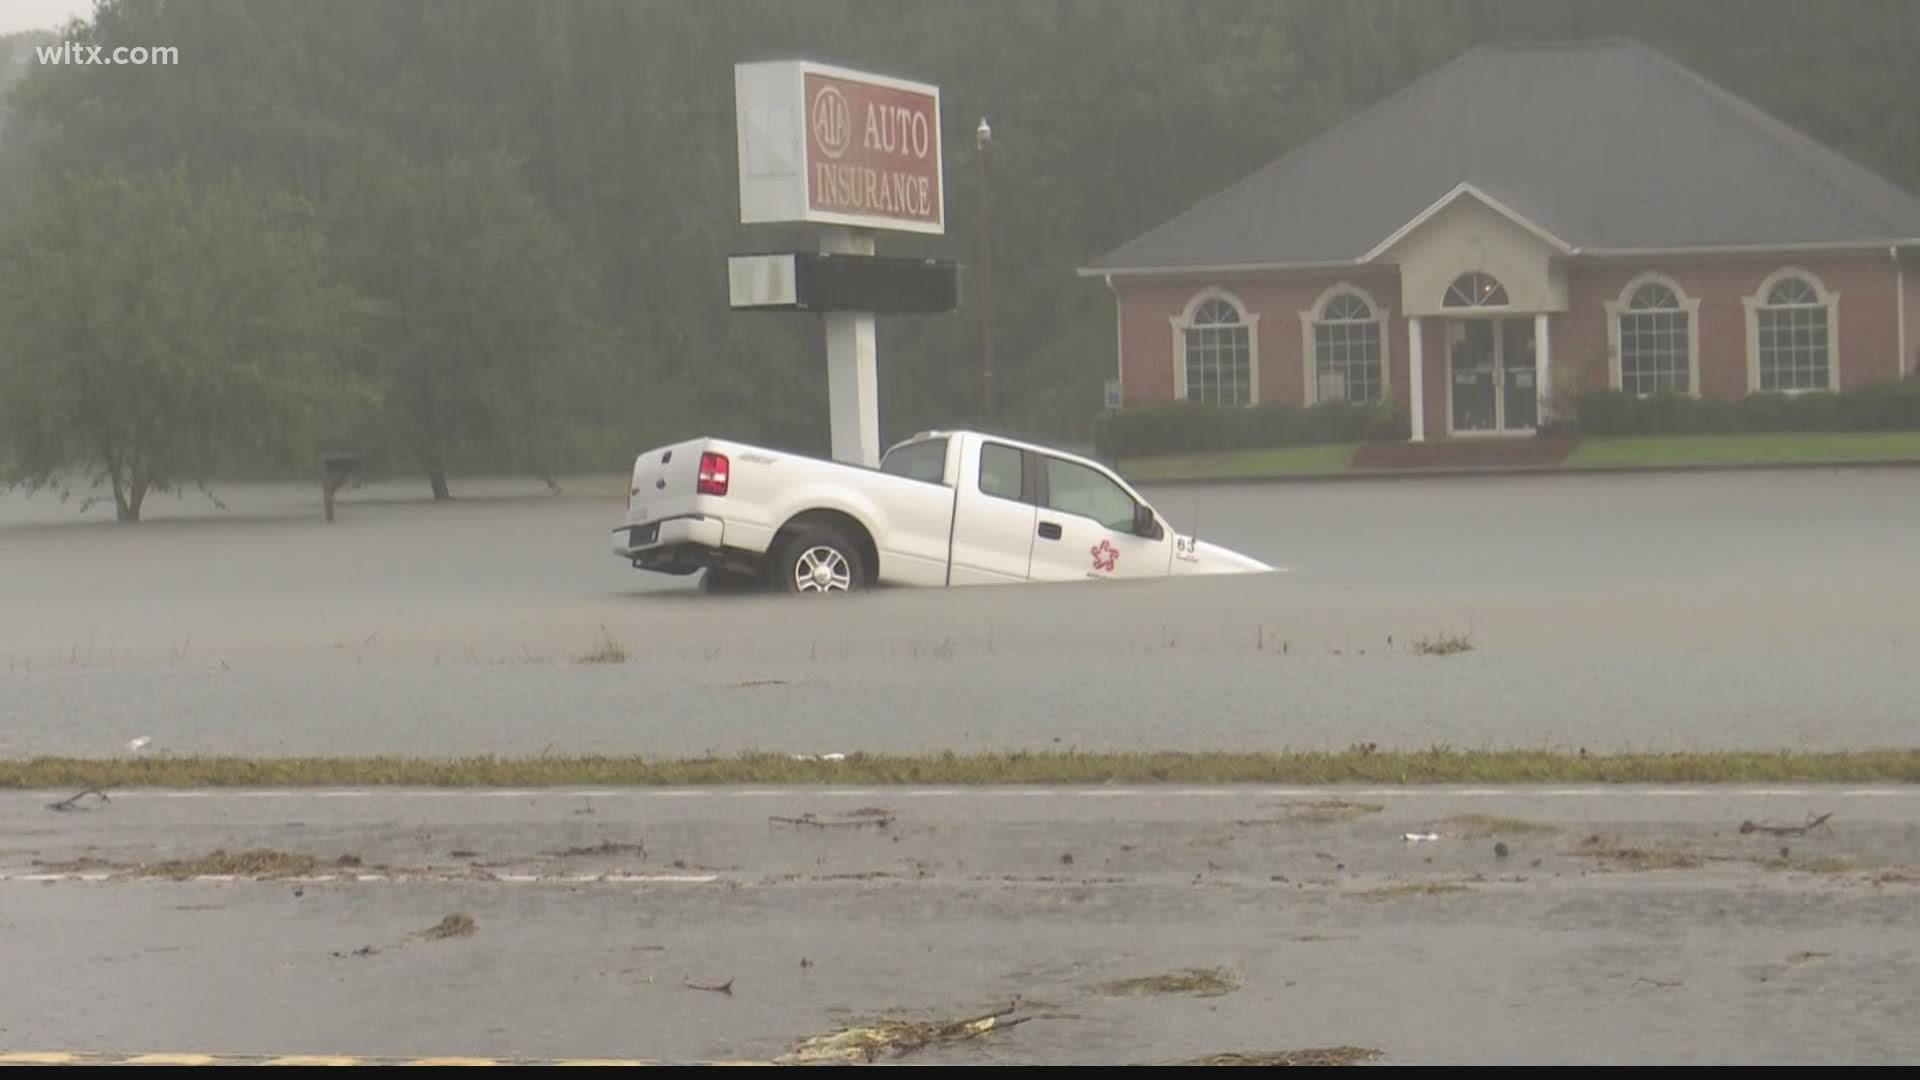 The remnants of Hurricane Sally brought severe weather to the Midlands Thursday, including flooding rains and several possible tornadoes.